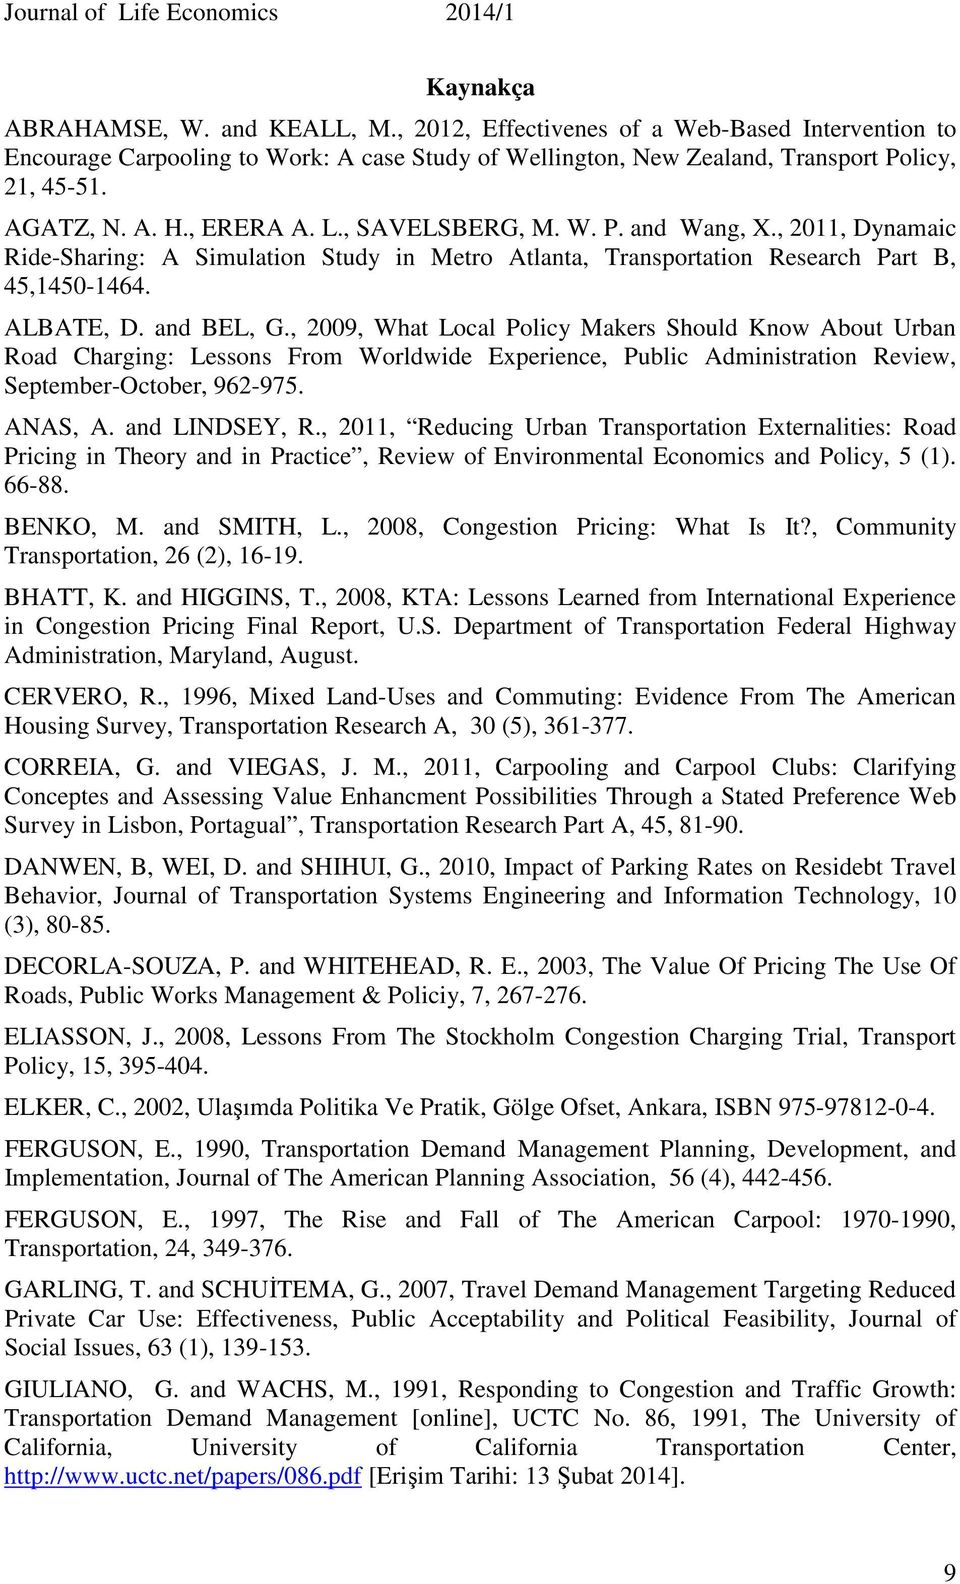 , 2009, What Local Policy Makers Should Know About Urban Road Charging: Lessons From Worldwide Experience, Public Administration Review, September-October, 962-975. ANAS, A. and LINDSEY, R.